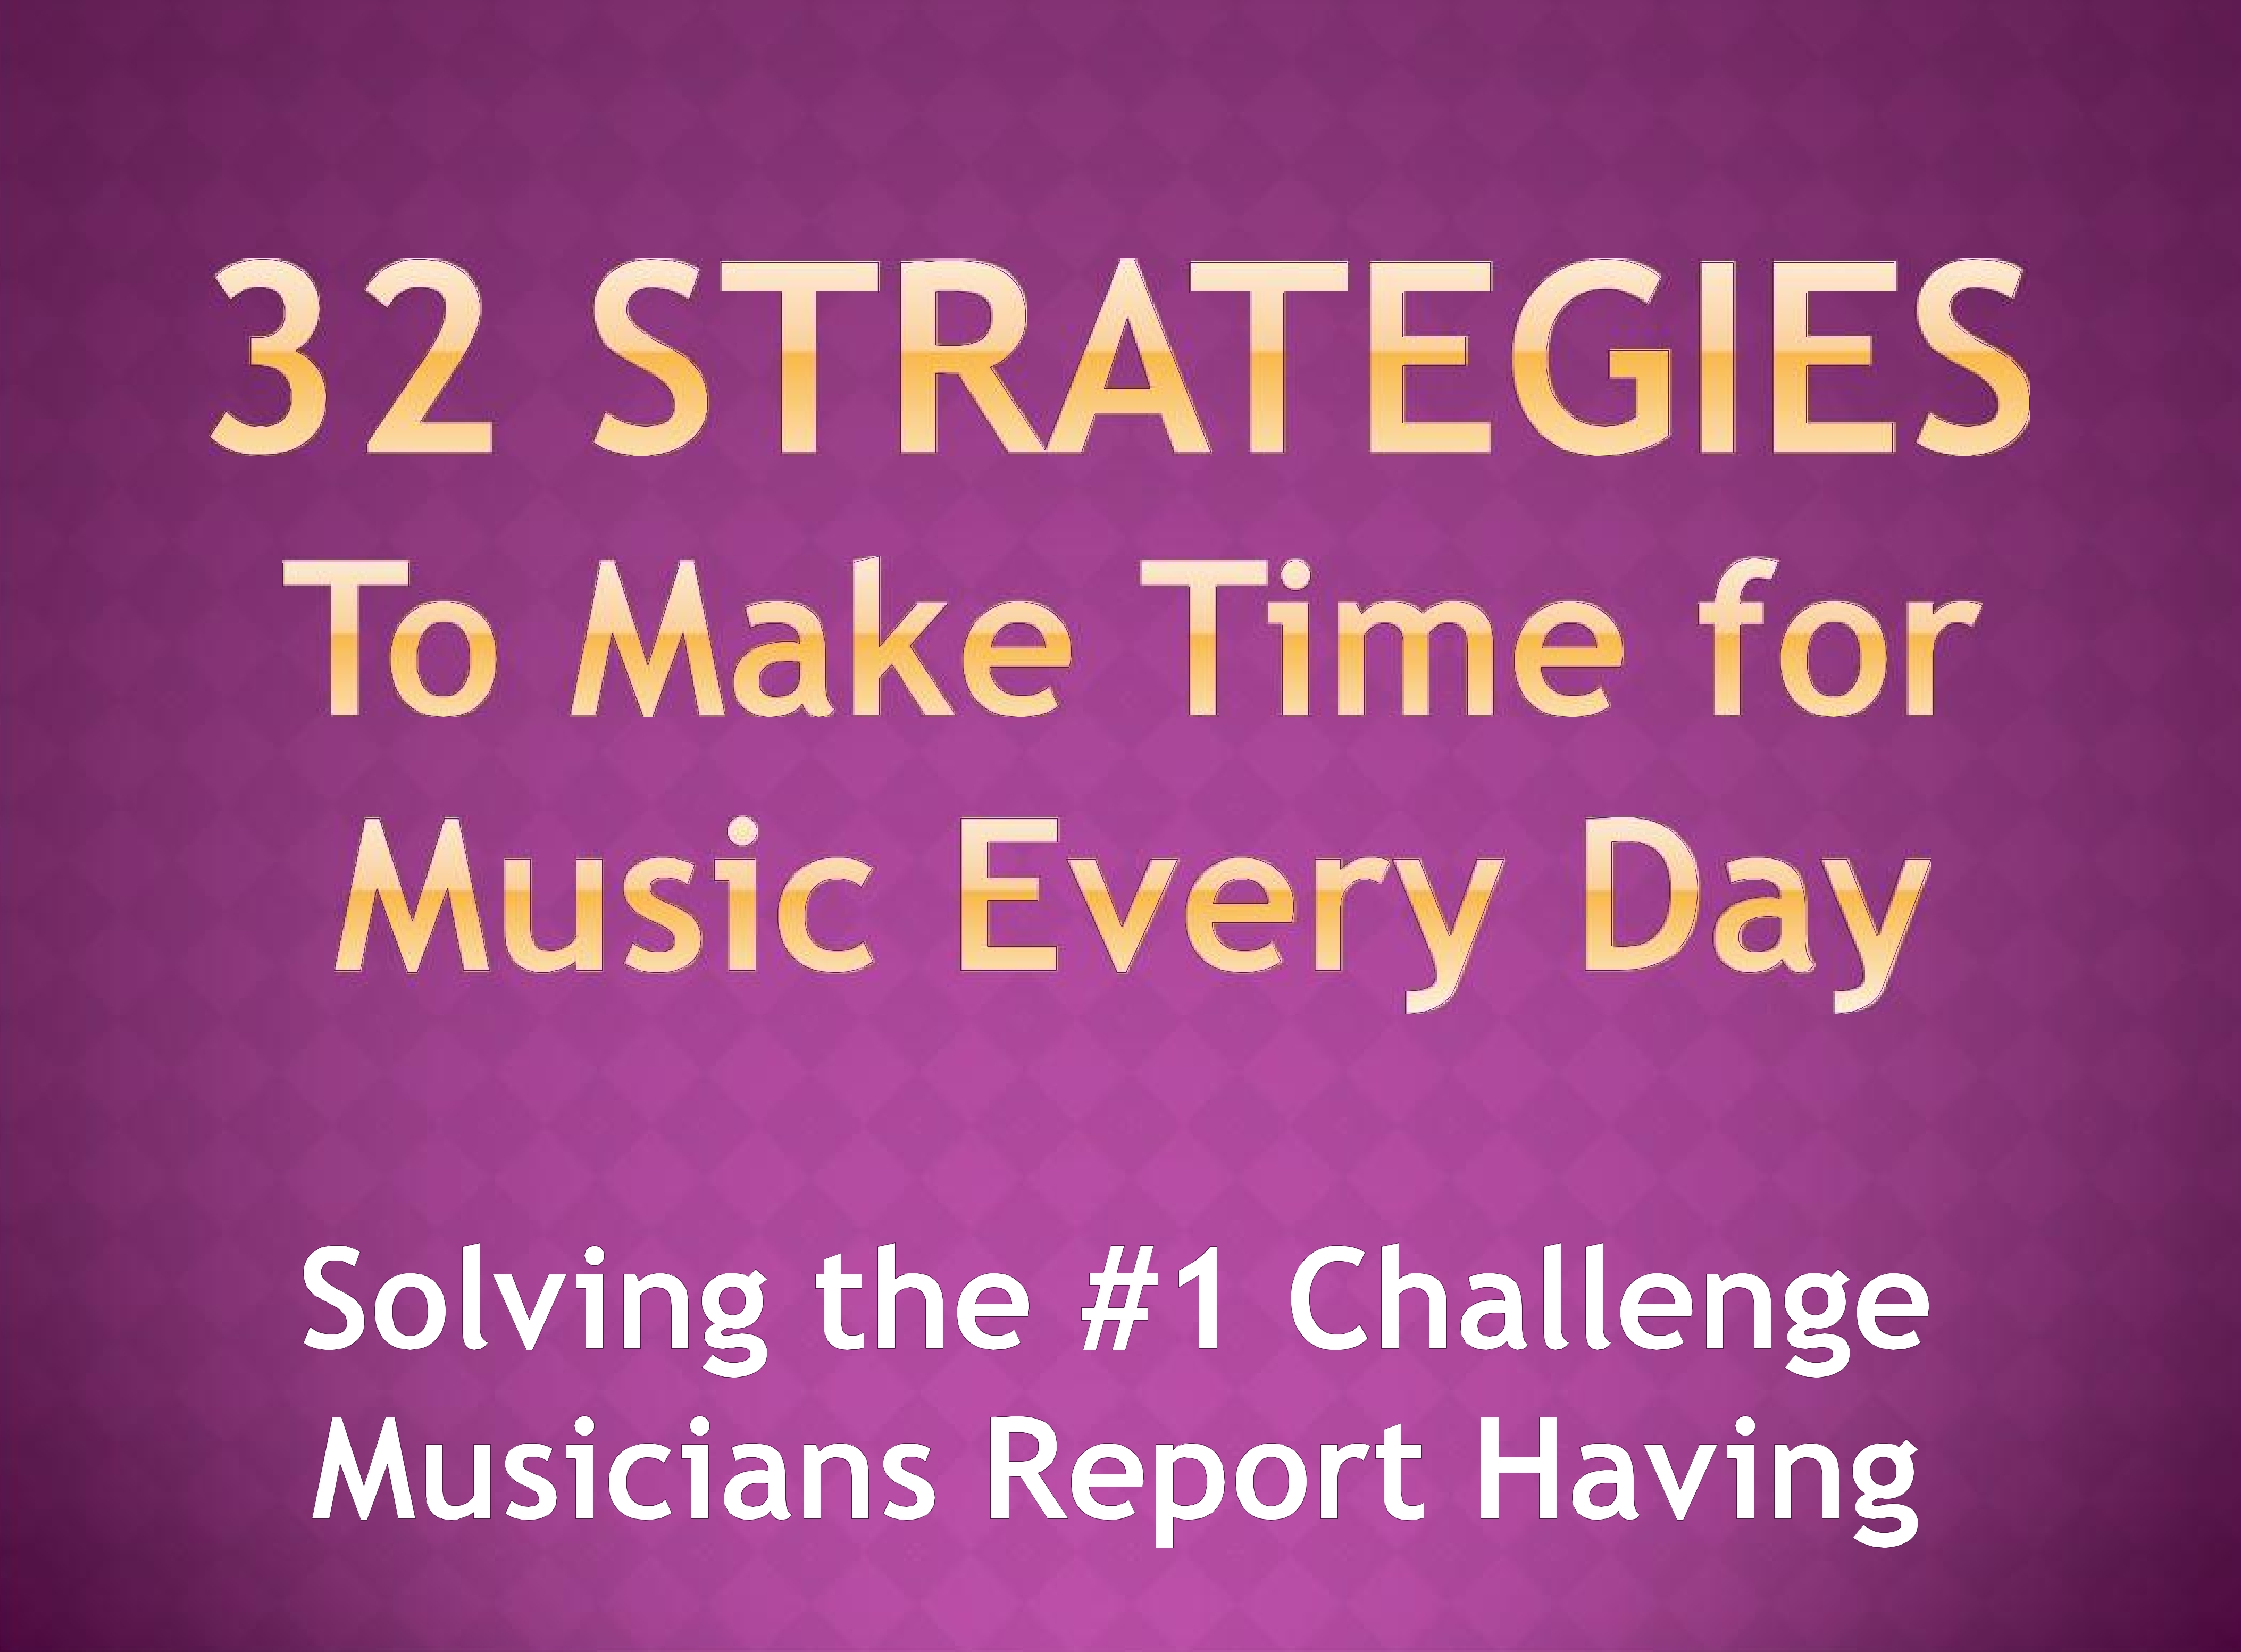 32 Strategies to Make Time for Music Every Day